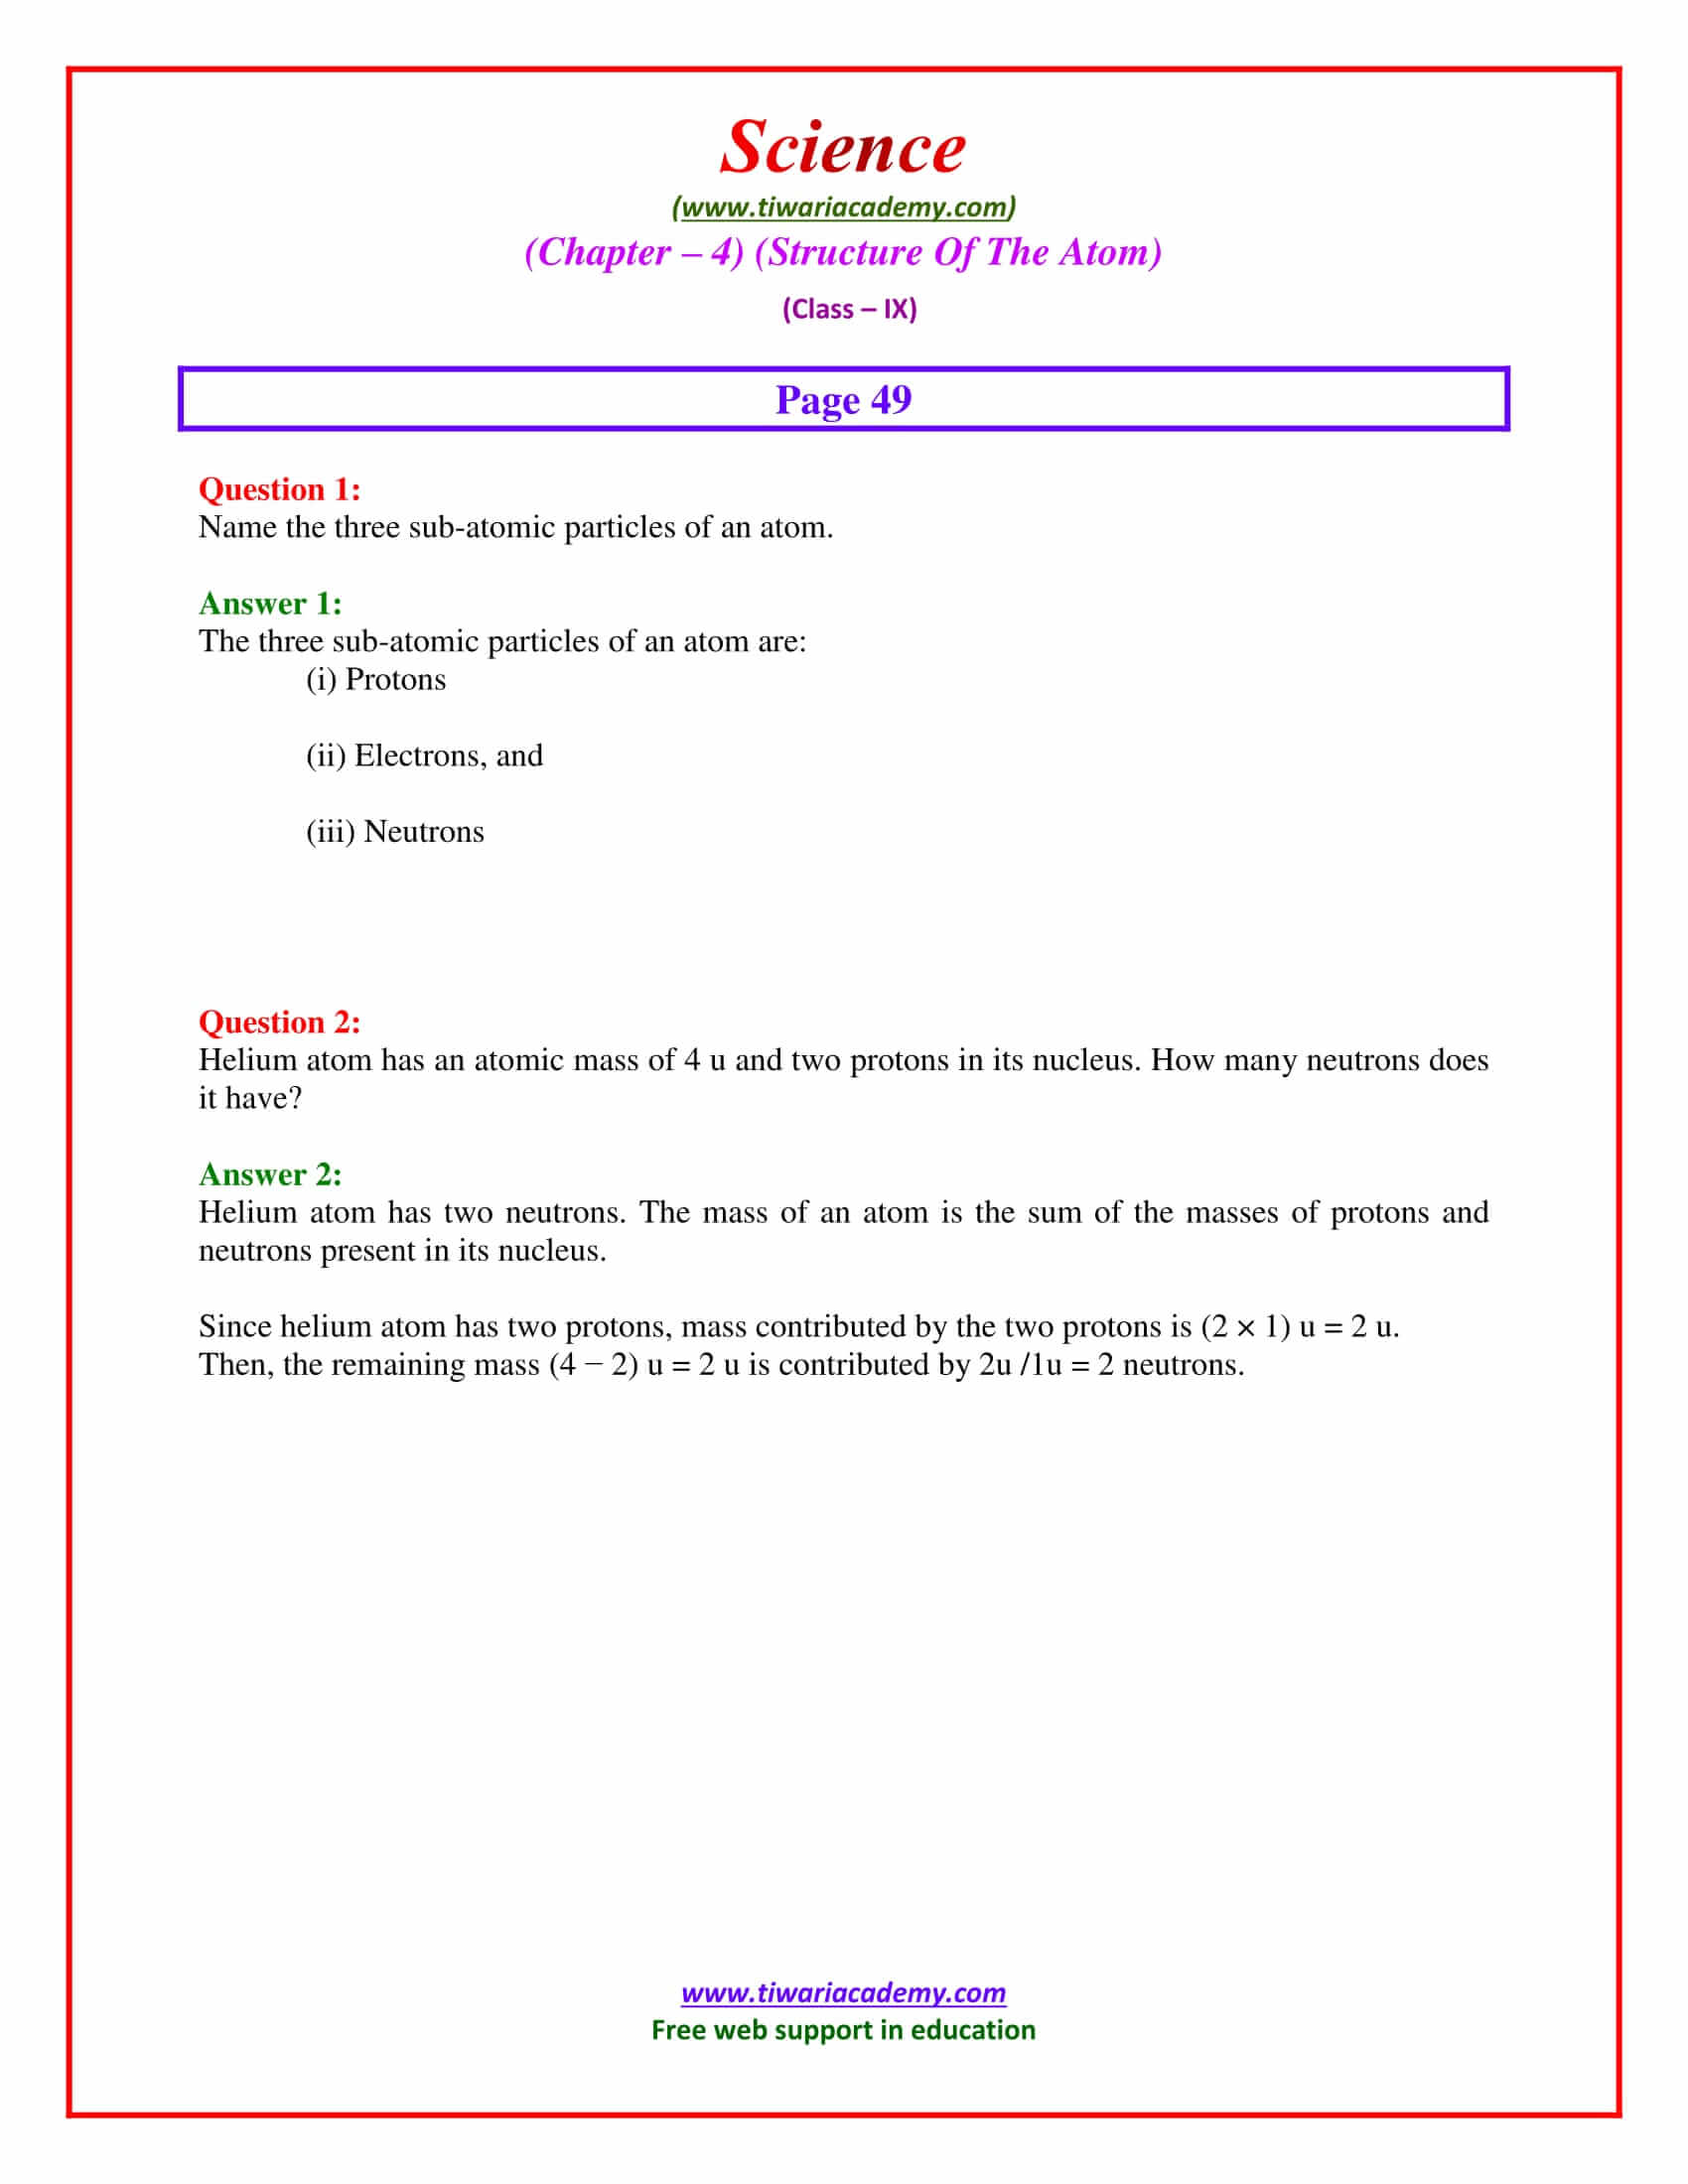 NCERT Solutions for Class 9 Science Chapter 4 intext questions page 49 in pdf form